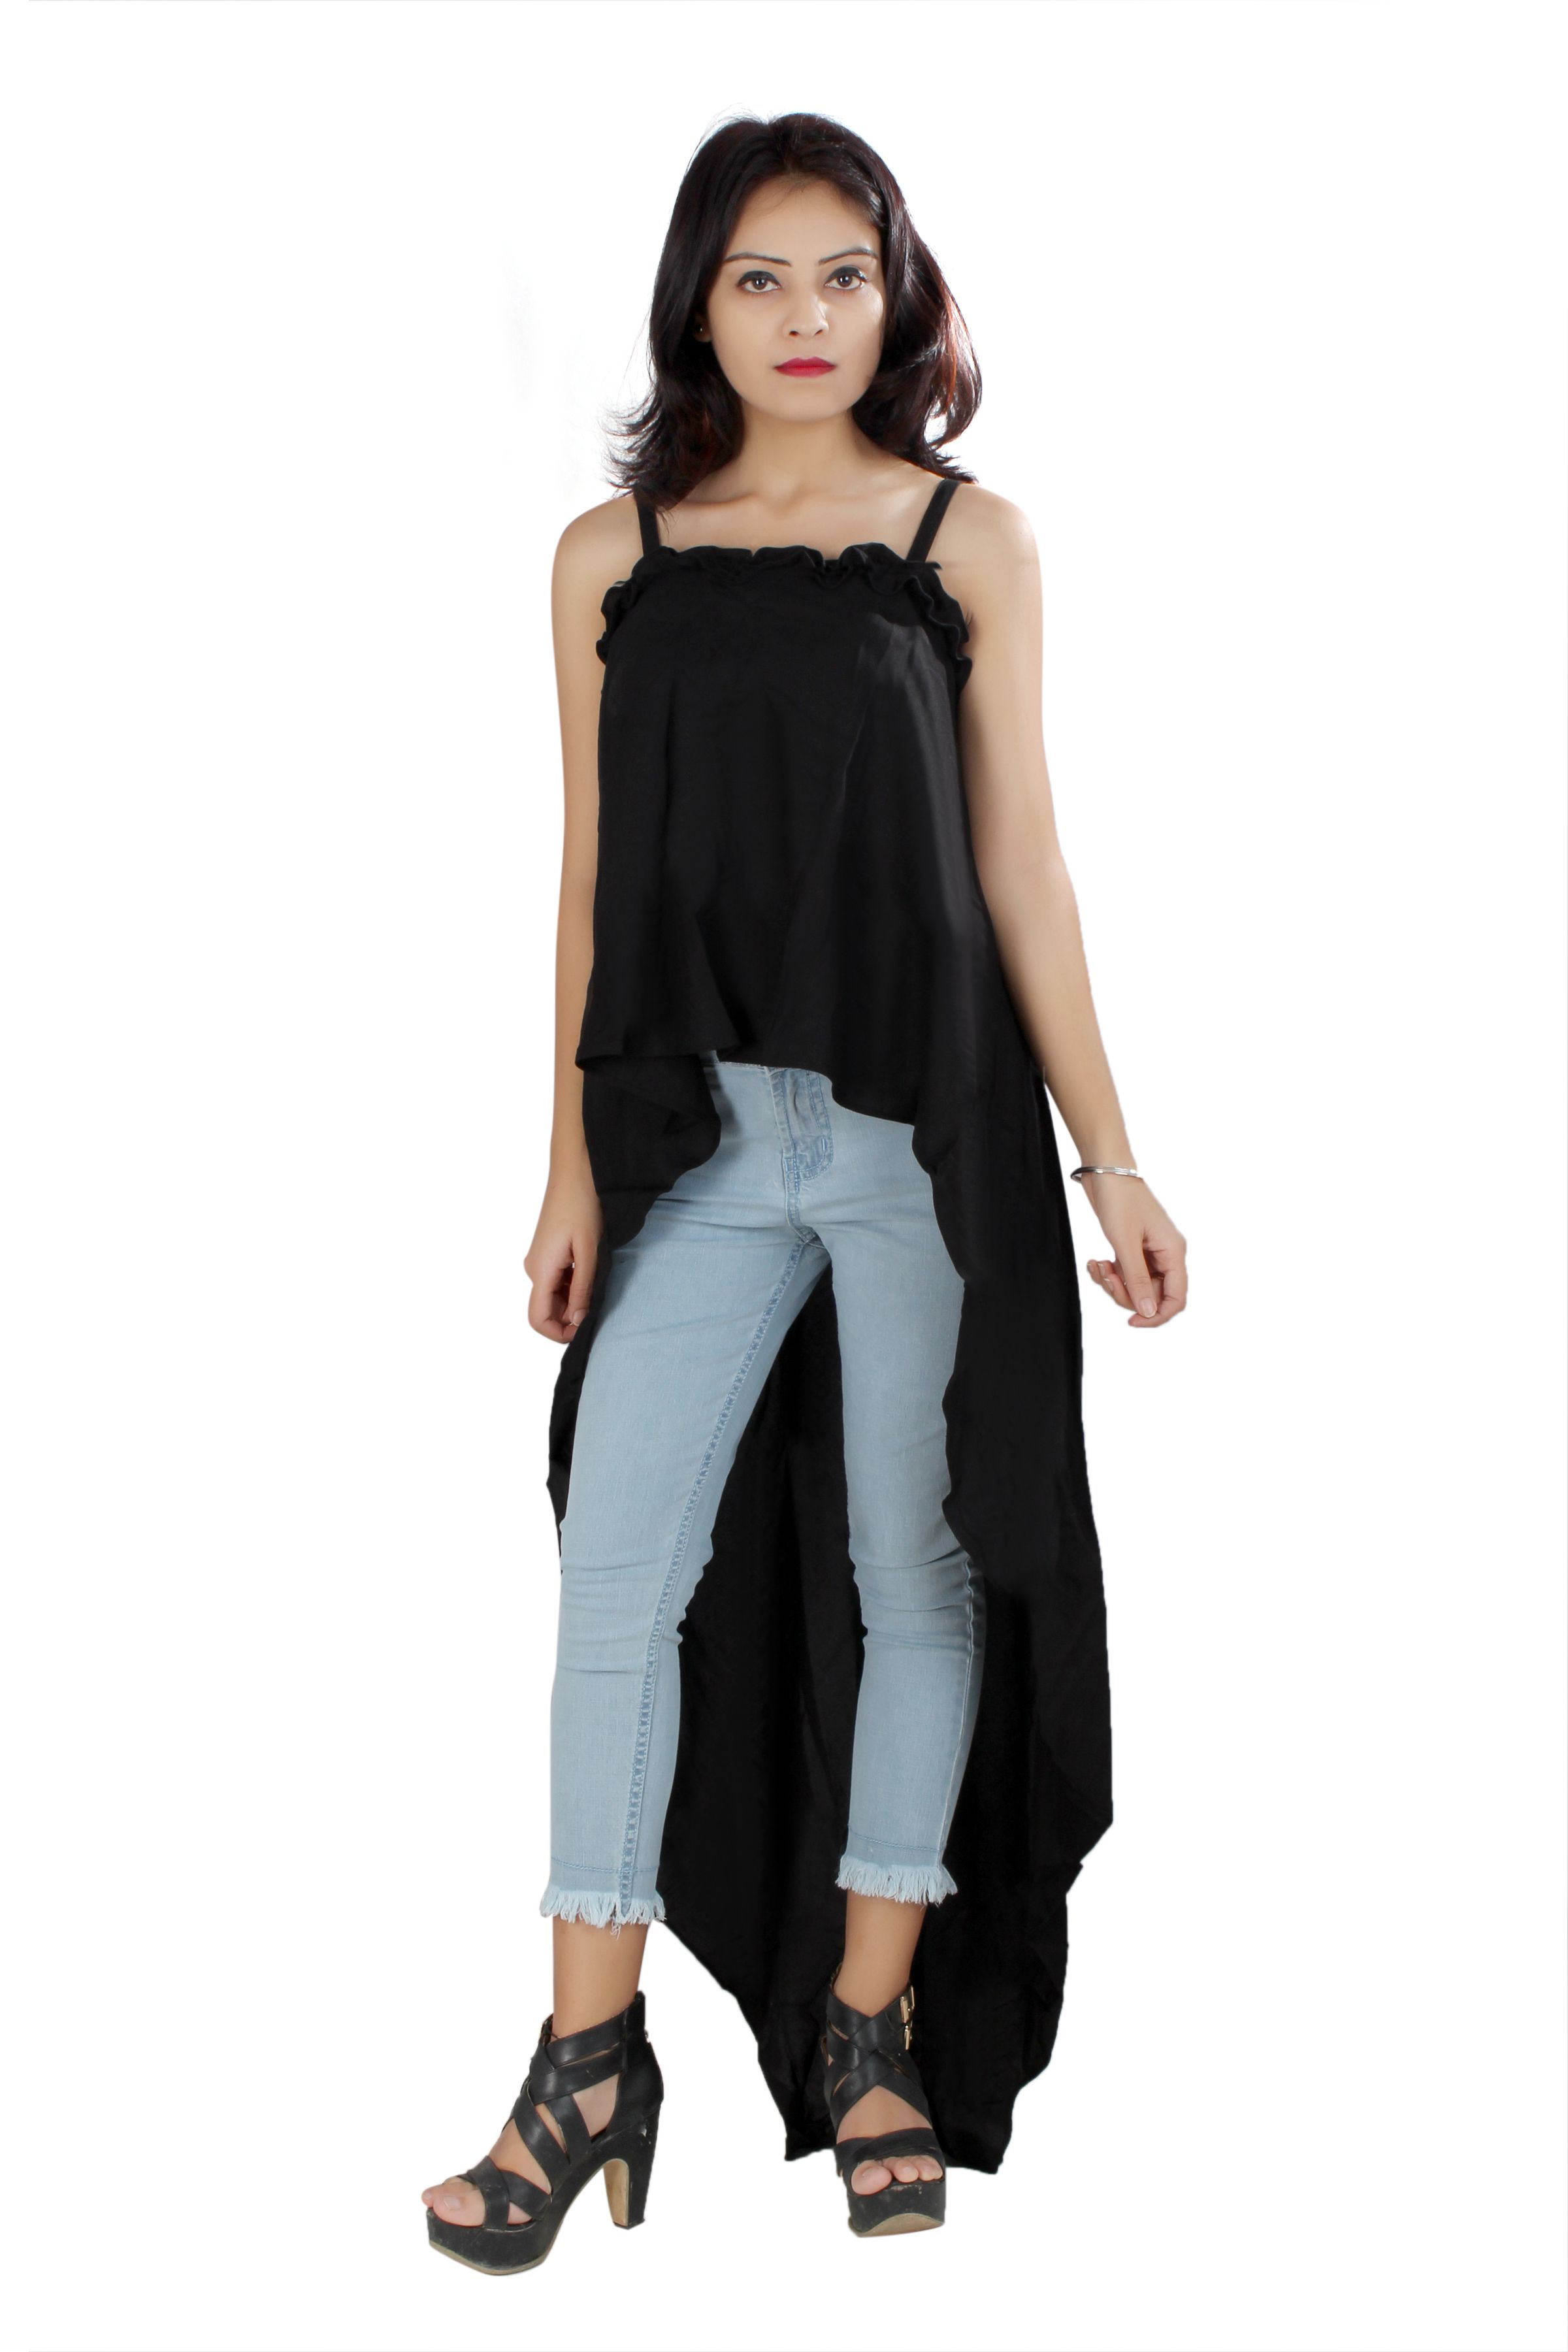 Party Wear Tops Snapdeal Outlet, 51 ...